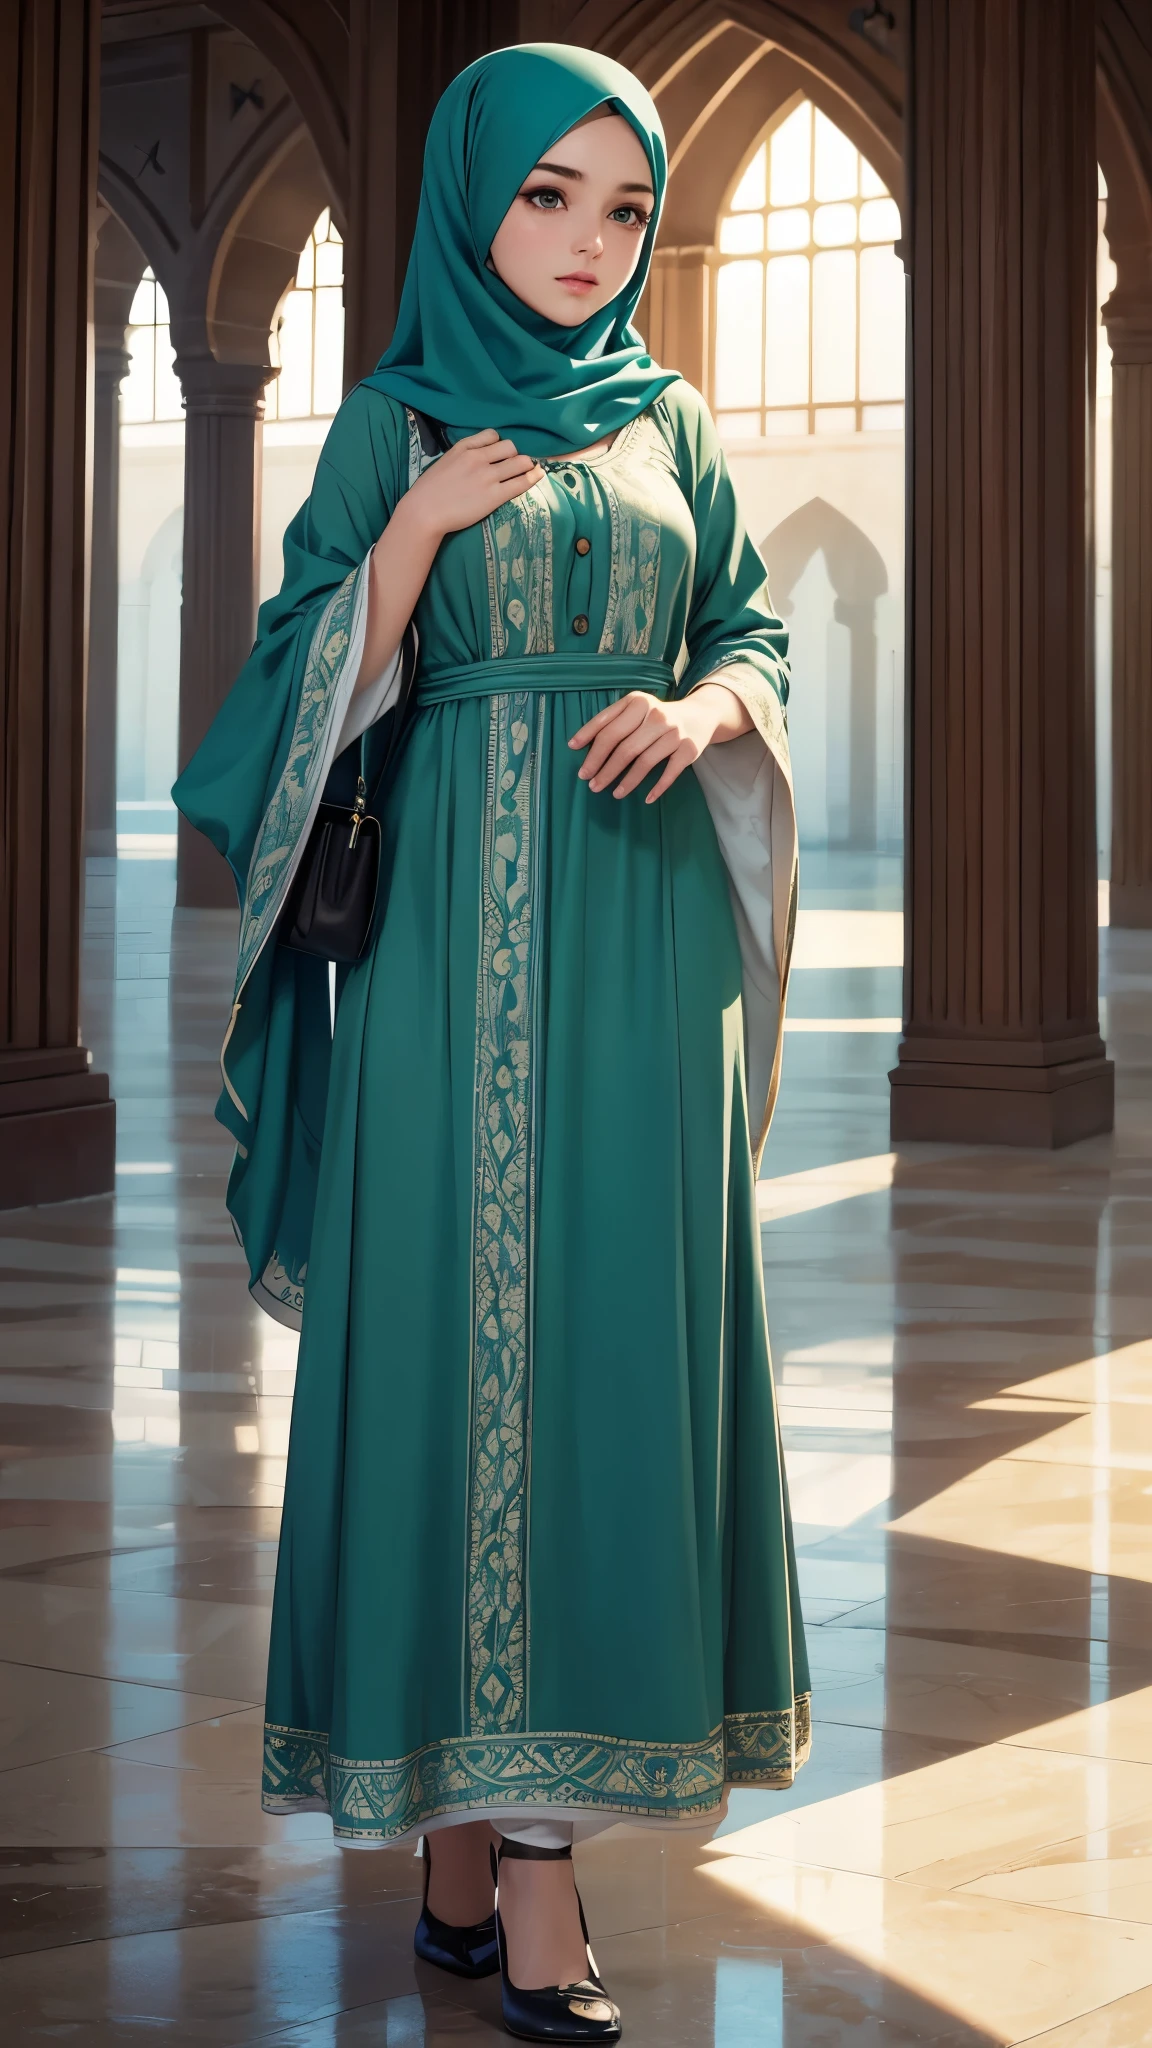 ((Best quality, 8k, Masterpiece :1. 3)), Sharp focus :1. 2, A pretty woman perfect figure :1. 4, (Wet thin button up long dress :1. 1), (light, mosque:1. 2), Highly detailed face, Detailed eyes, Double eyelid. headscarves, wear long headscarves covering full head long green dress, biger dress. islamic clothes covering full body . Reallshot, reality, realistic, fantastic, full detail cover. Cute face, small breast.